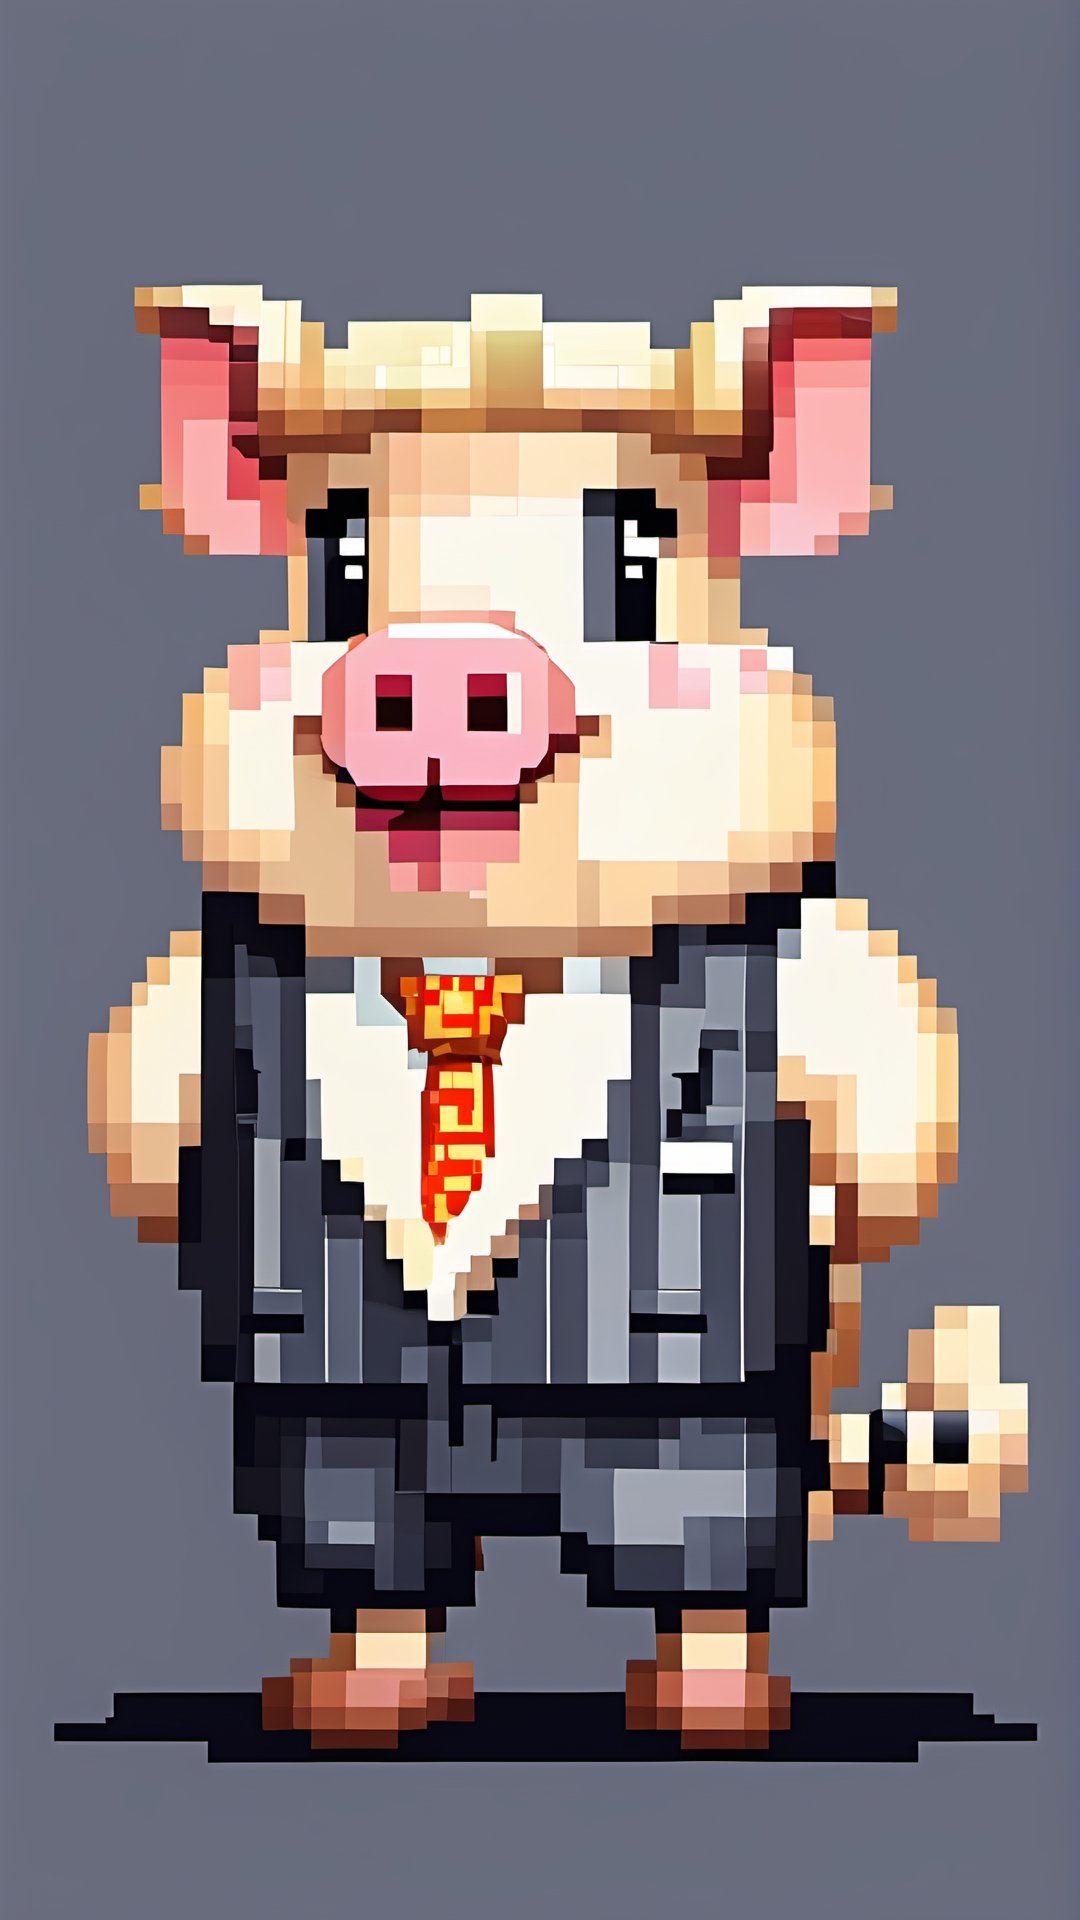 (a white-striped pig, anthropomorphic figure), weighing 100kg, (hair is a braid, the braid is draped across the chest), ((wearing a suit, the figure)), (standing on two legs), commanding with both hands forward, smiling towards the camera,pixel style